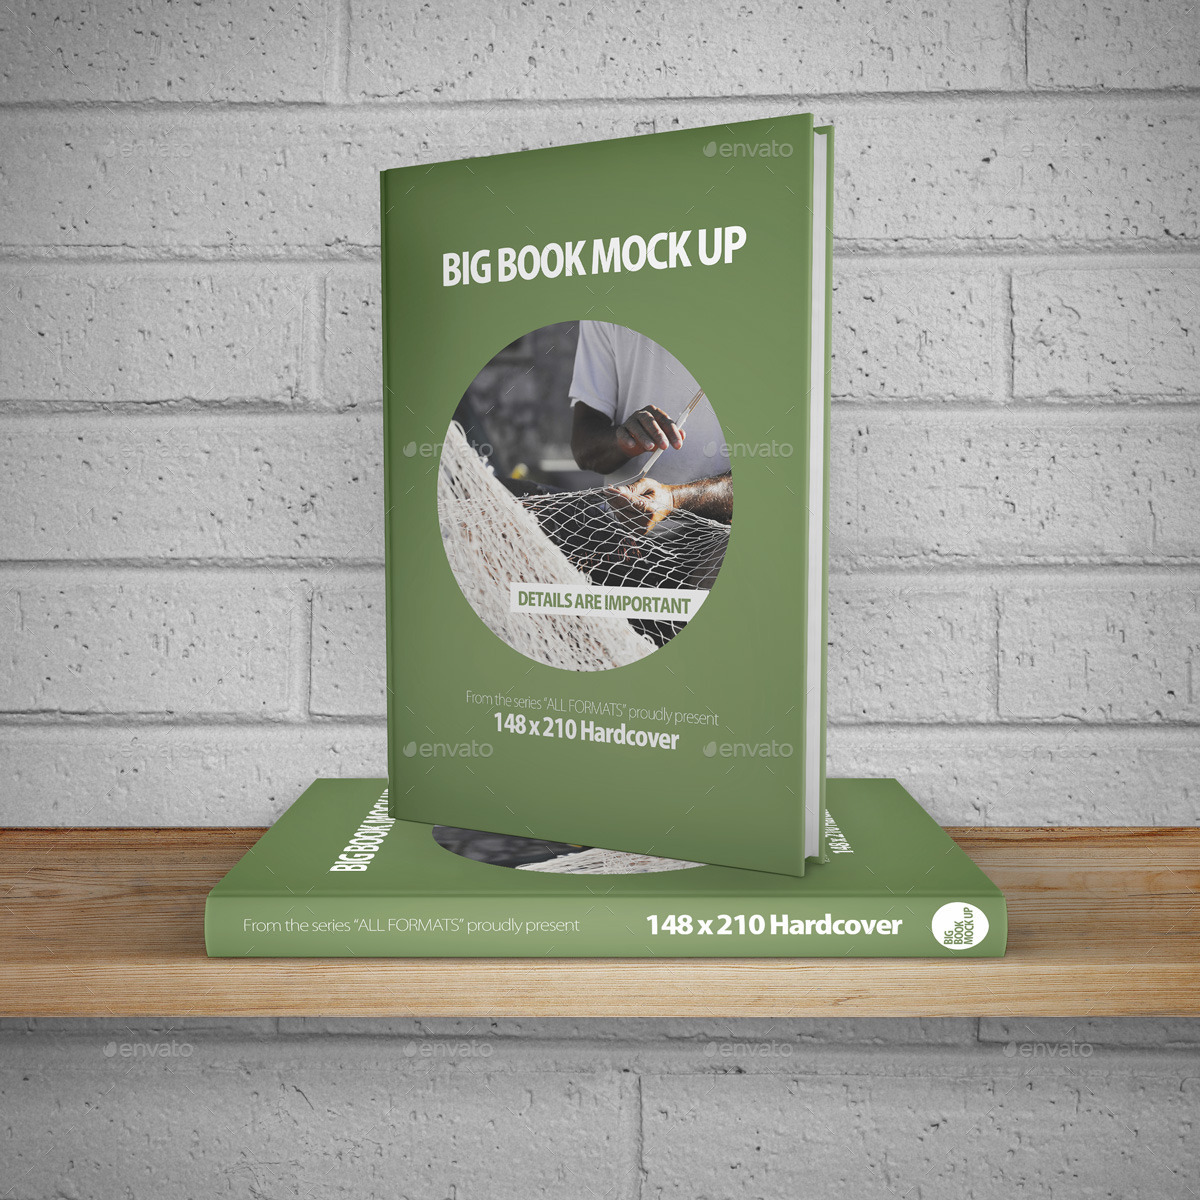 Download Book Mock Up - A5 Hard Cover by pozitivo | GraphicRiver